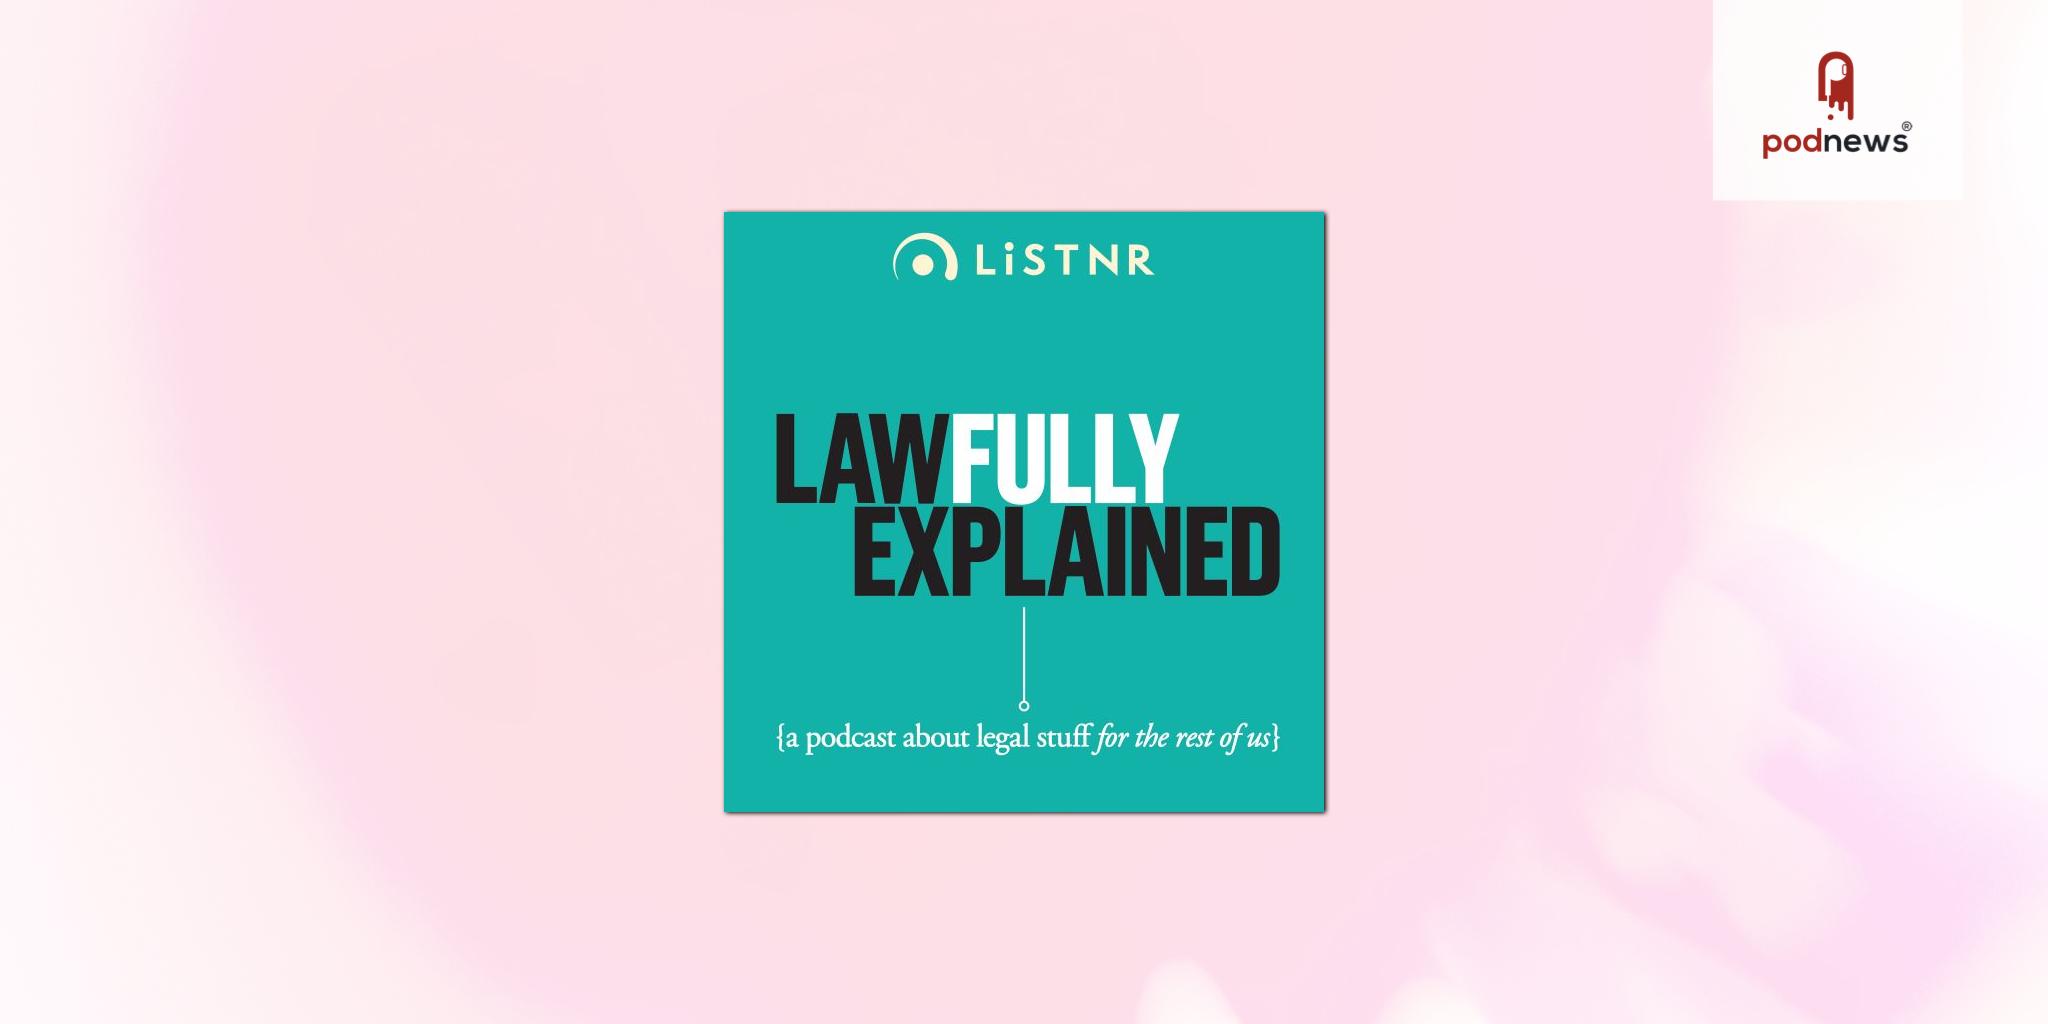 LiSTNR partners with the Law Society of NSW to break down everyday legal issues in Lawfully Explained